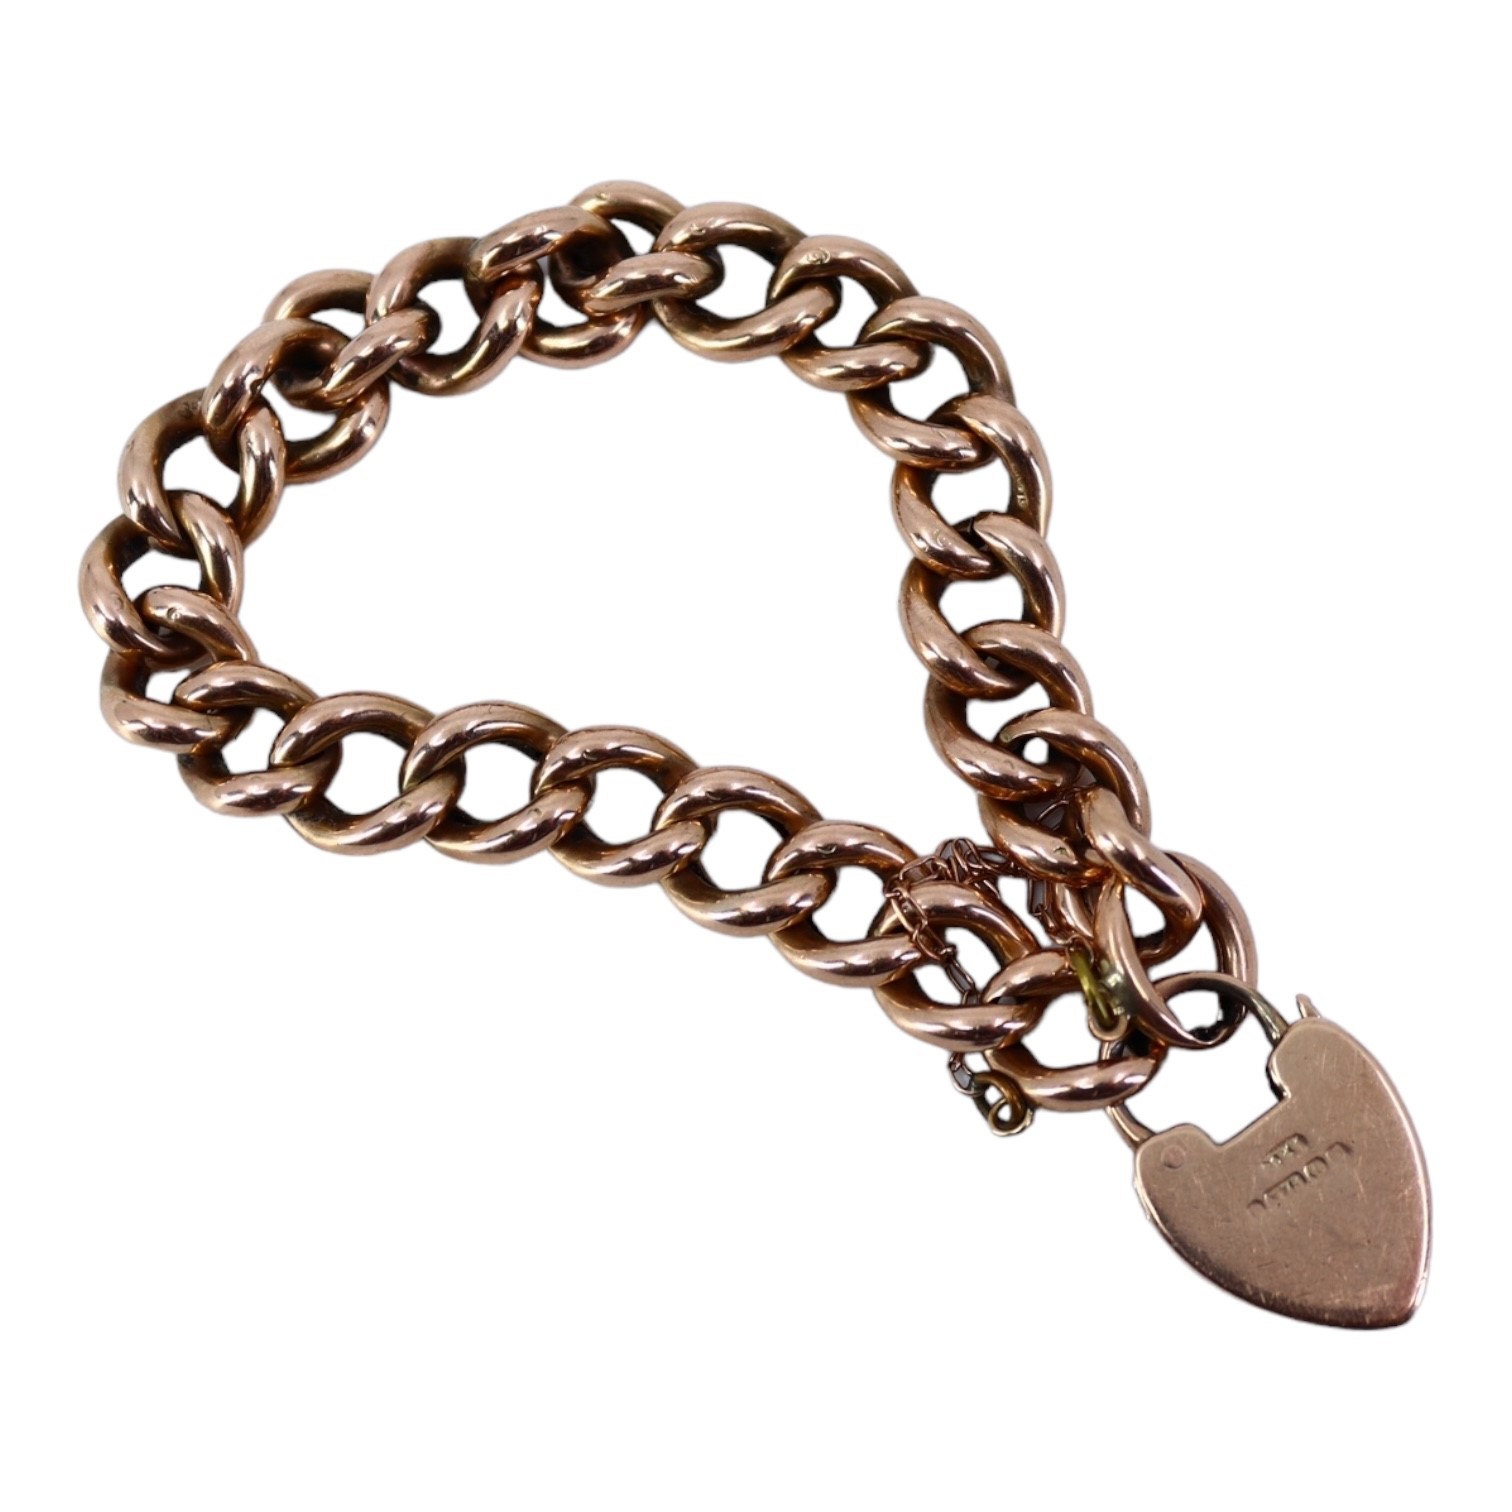 AN EDWARDIAN 9CT ROSE GOLD CURB LINK CHARM BRACELET Having heart shaped padlock clasp. (approx - Image 2 of 3